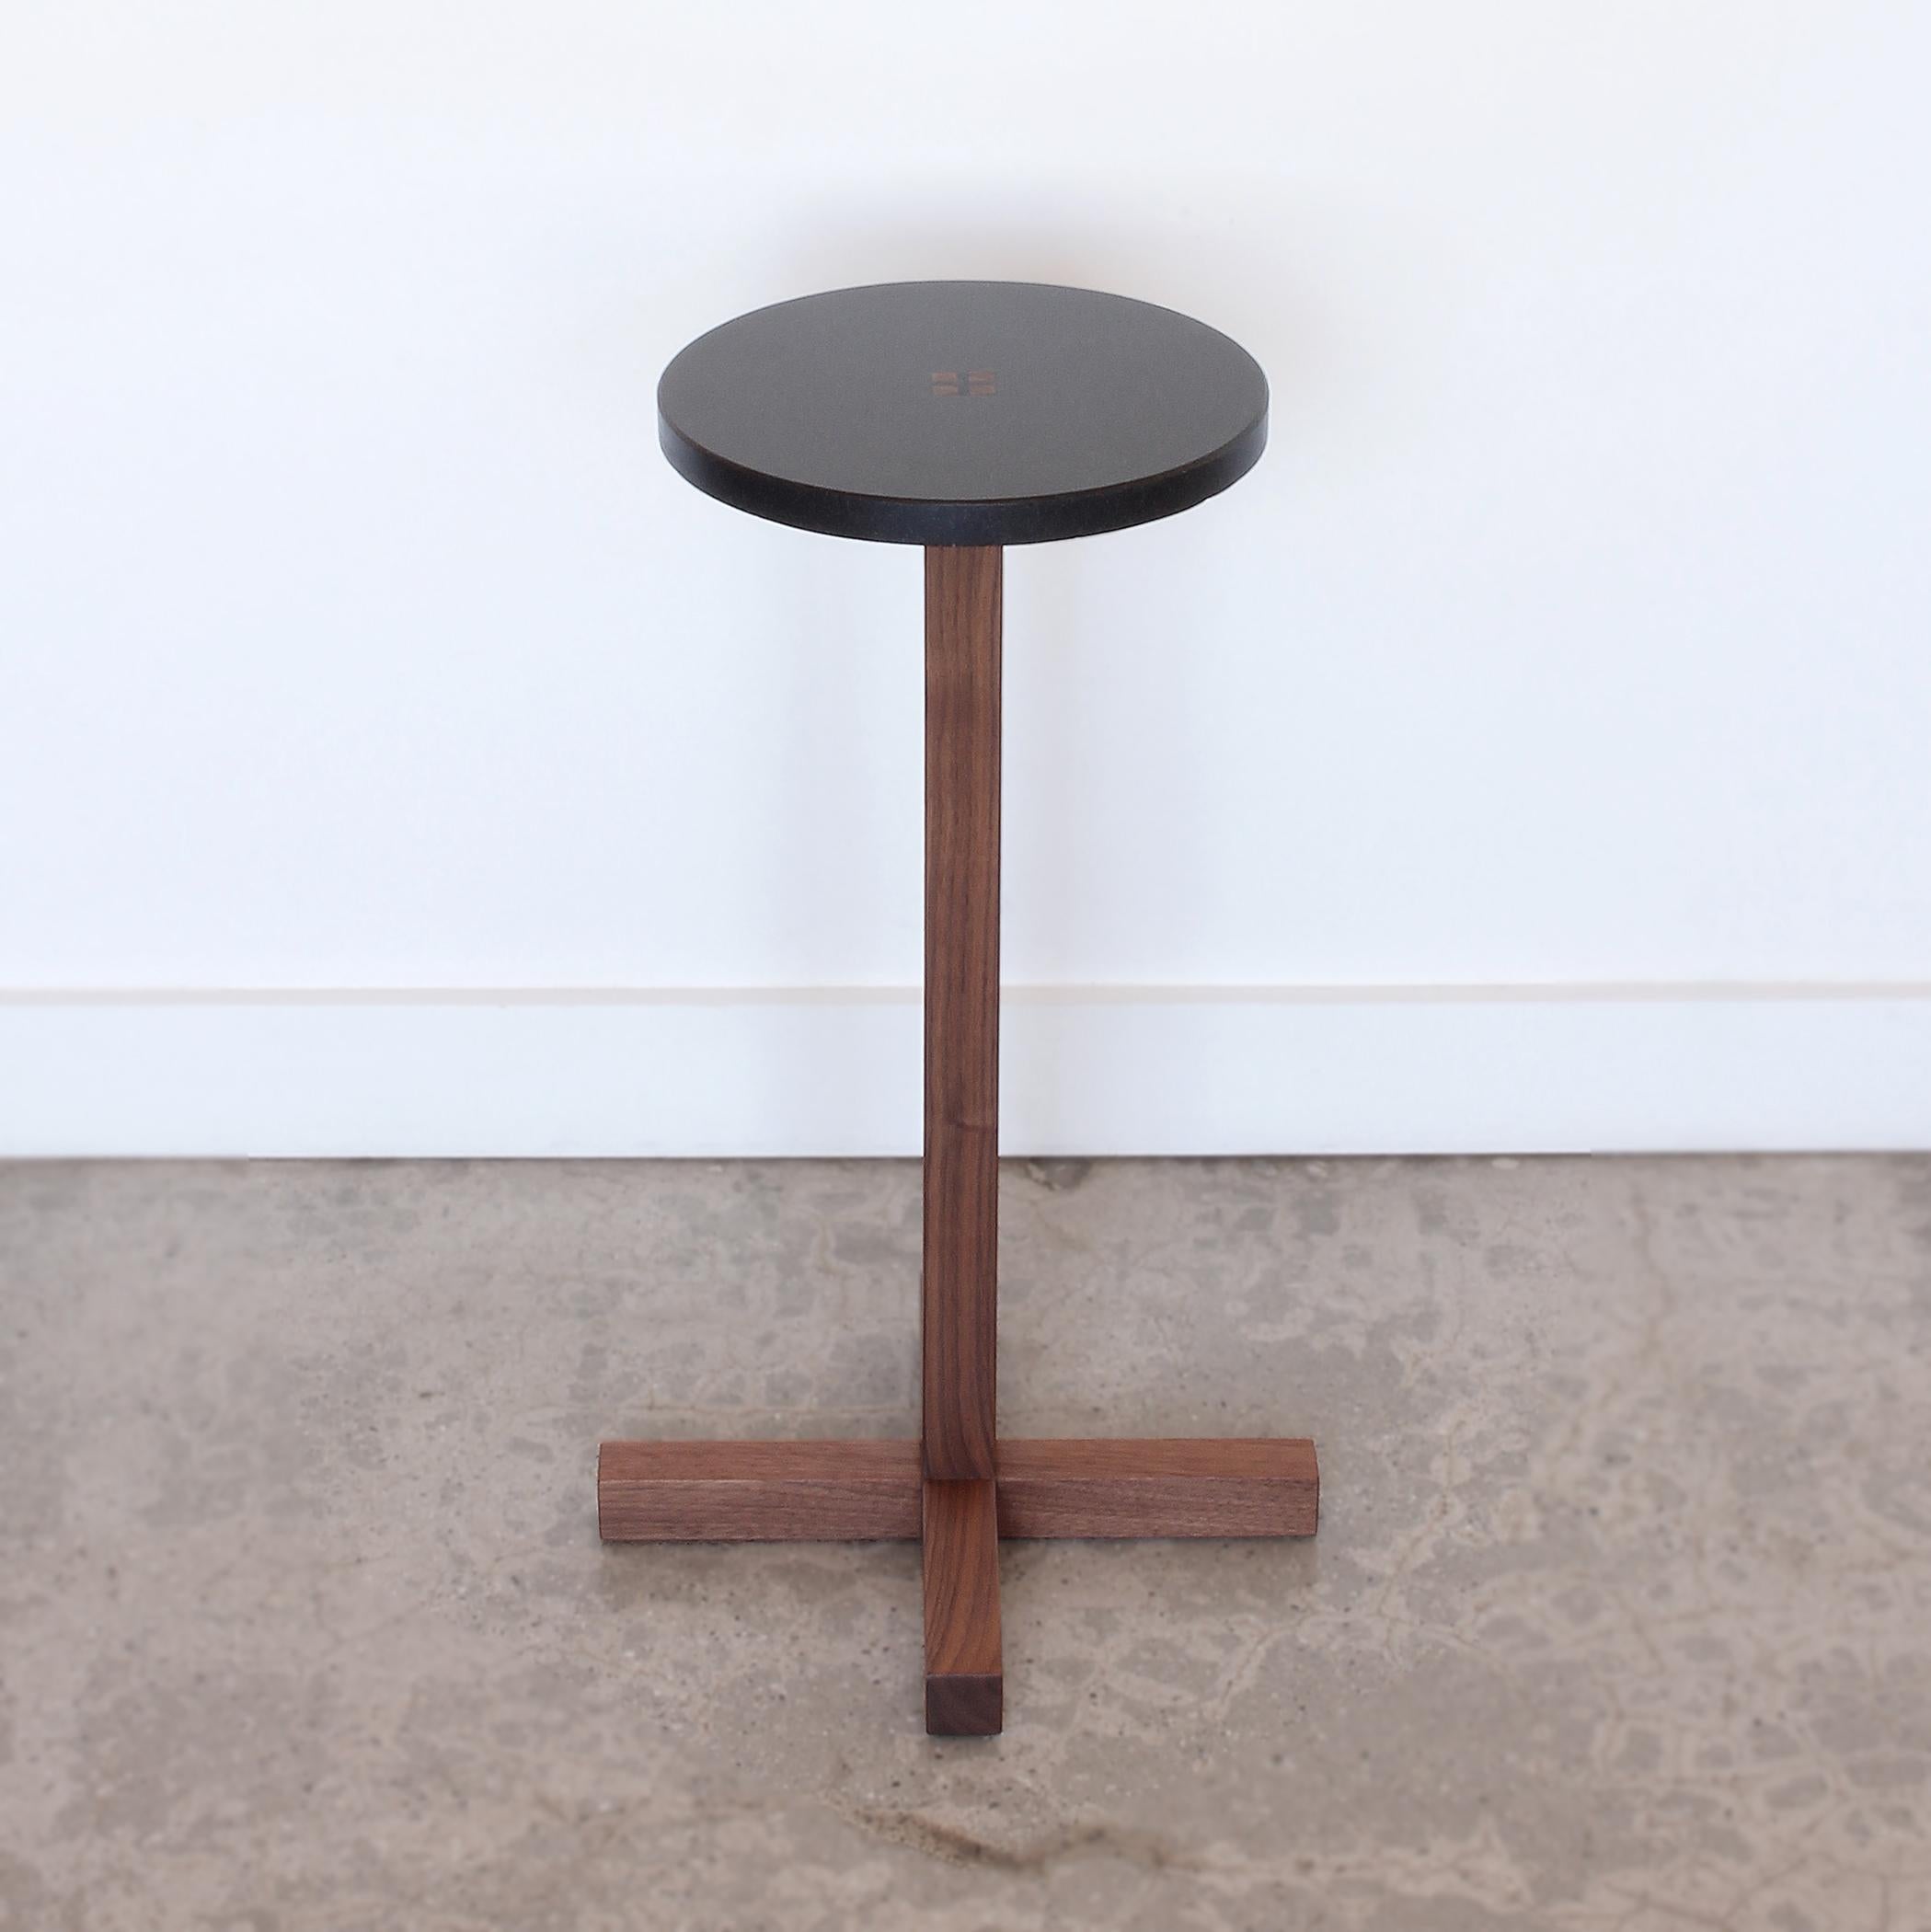 Drink Table with black granite top joined to a solid walnut base. Ebony wedges at center table top are driven permanently into place to combine stone top with wood base. The wood base is constructed with traditional Japanese joinery for structure